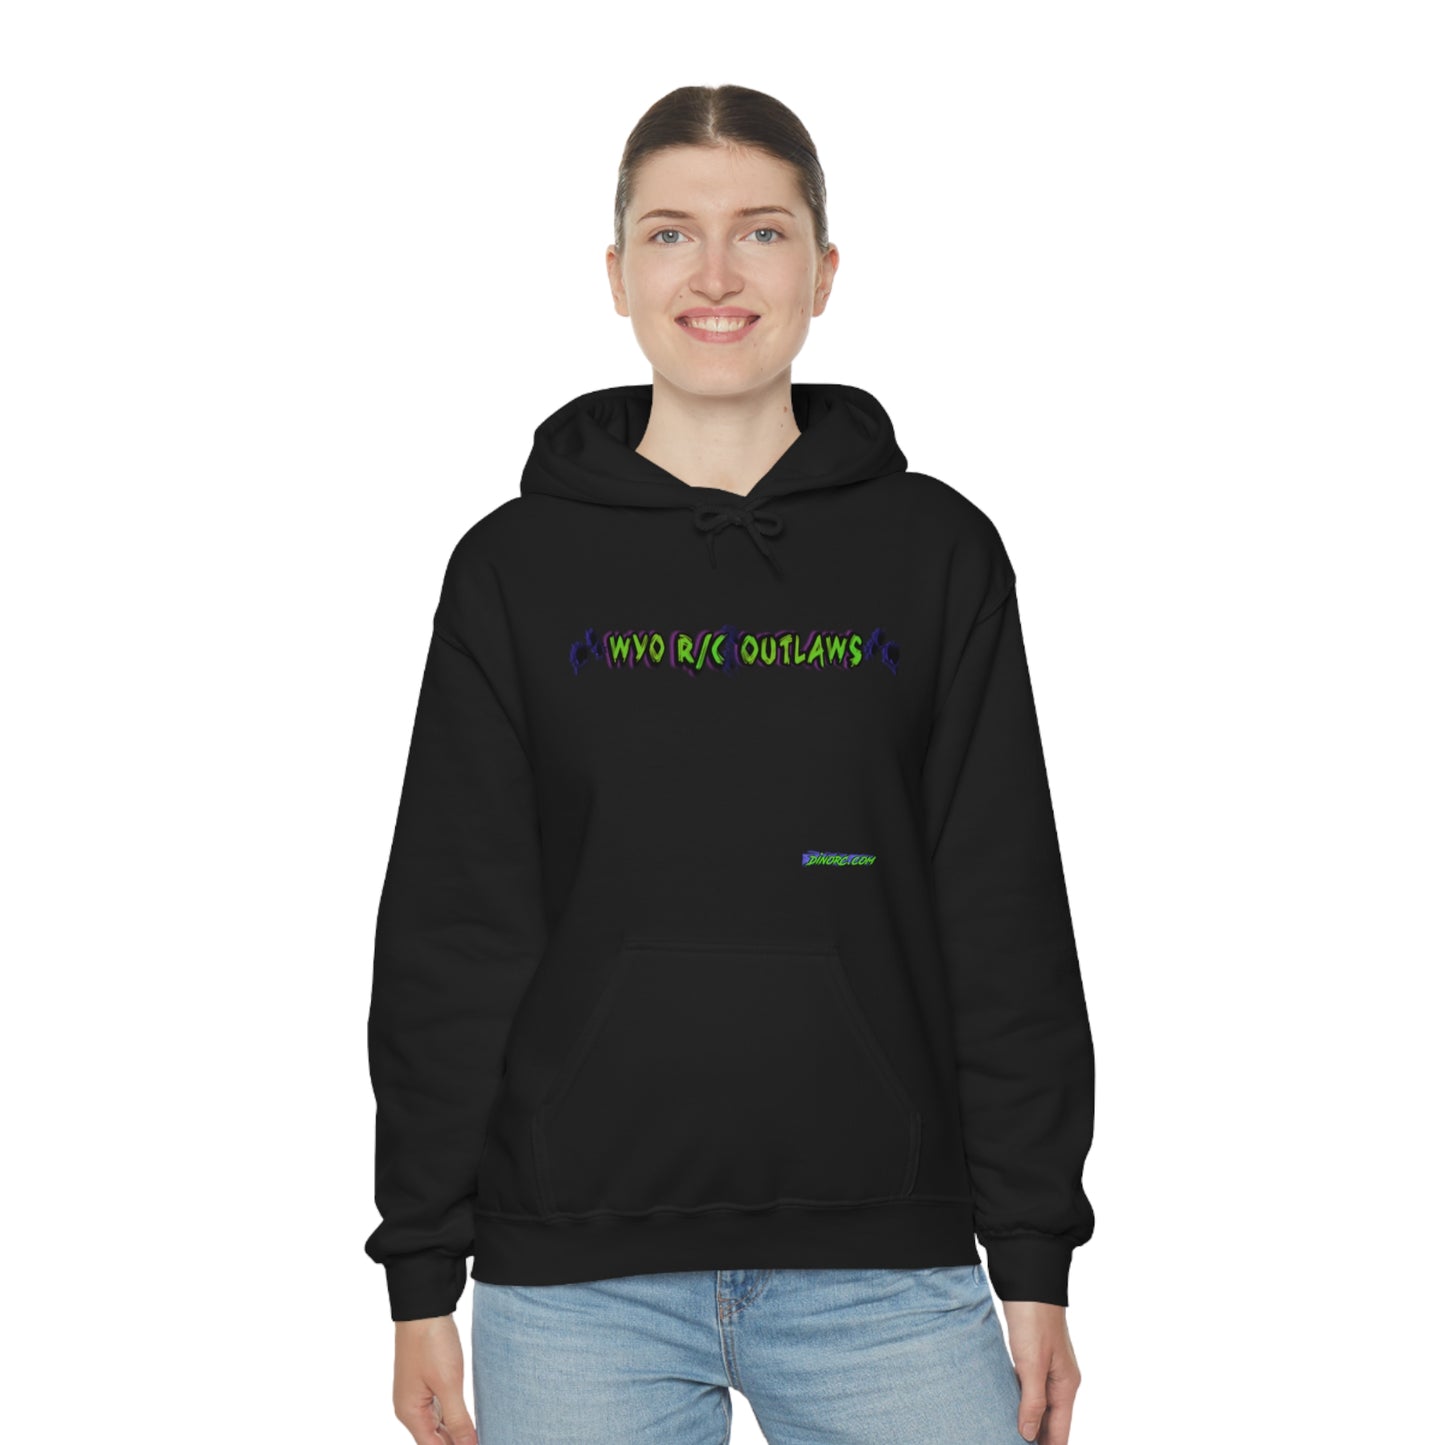 RC Outlaws DinoRC in 4 colors front back Hooded Sweatshirt